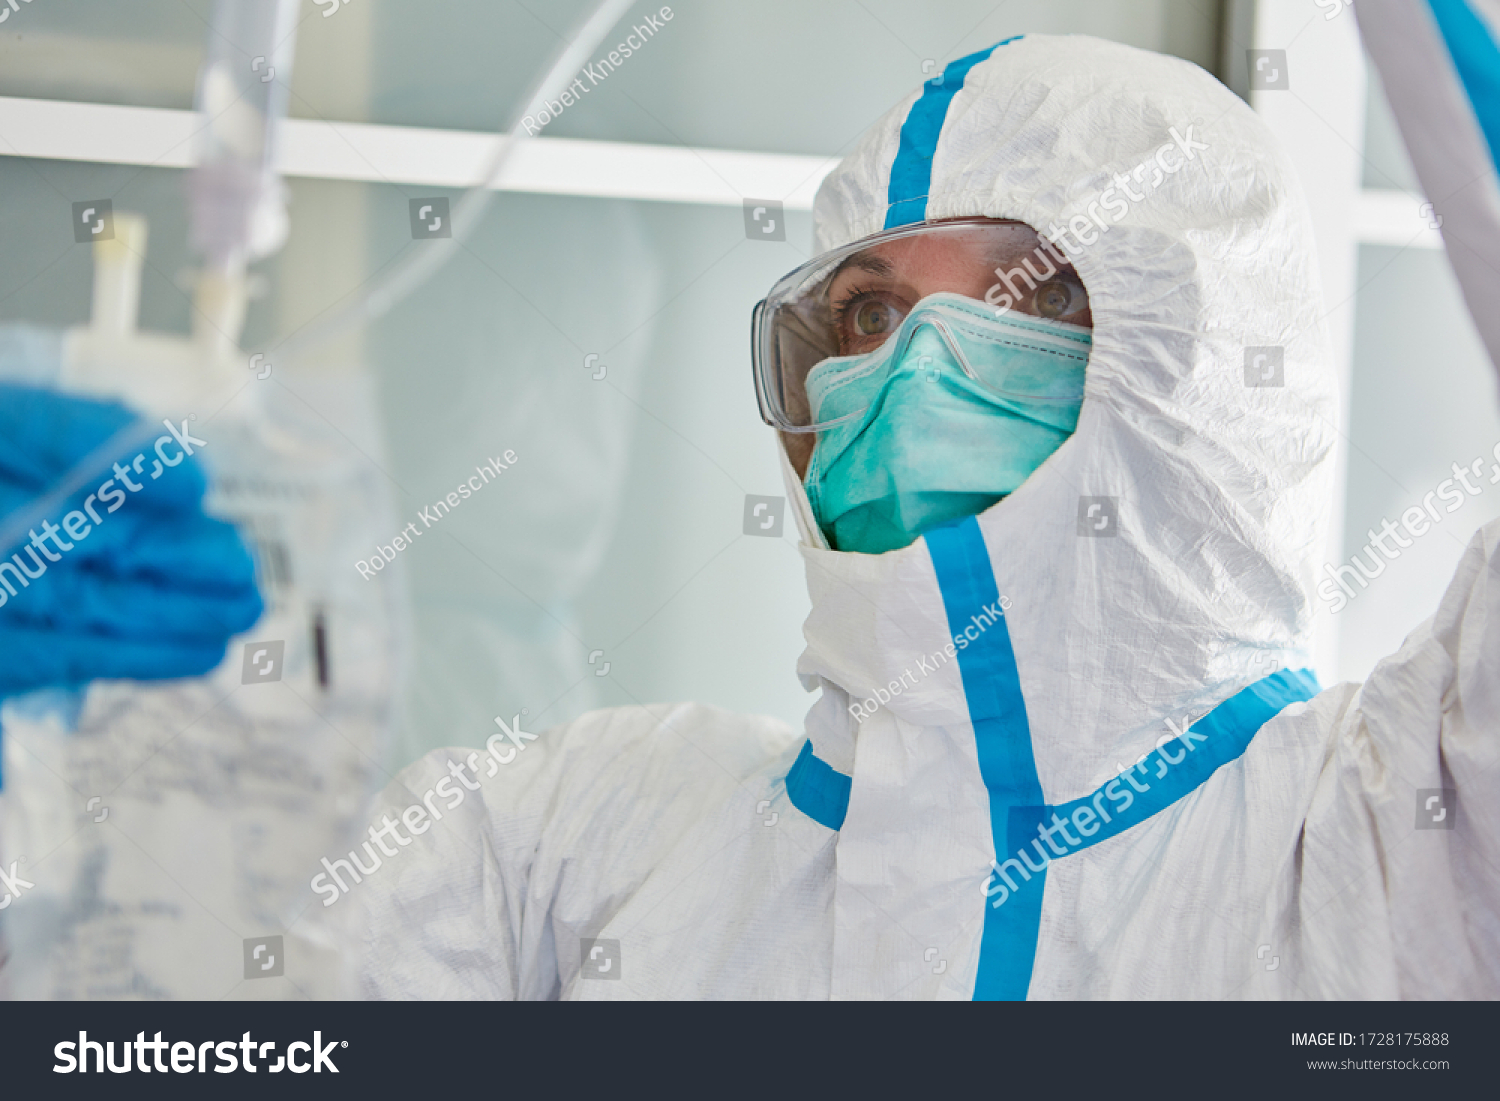 Doctor in protective clothing in hospital intensive care unit treats Covid-19 patient with infusion during coronavirus pandemic #1728175888